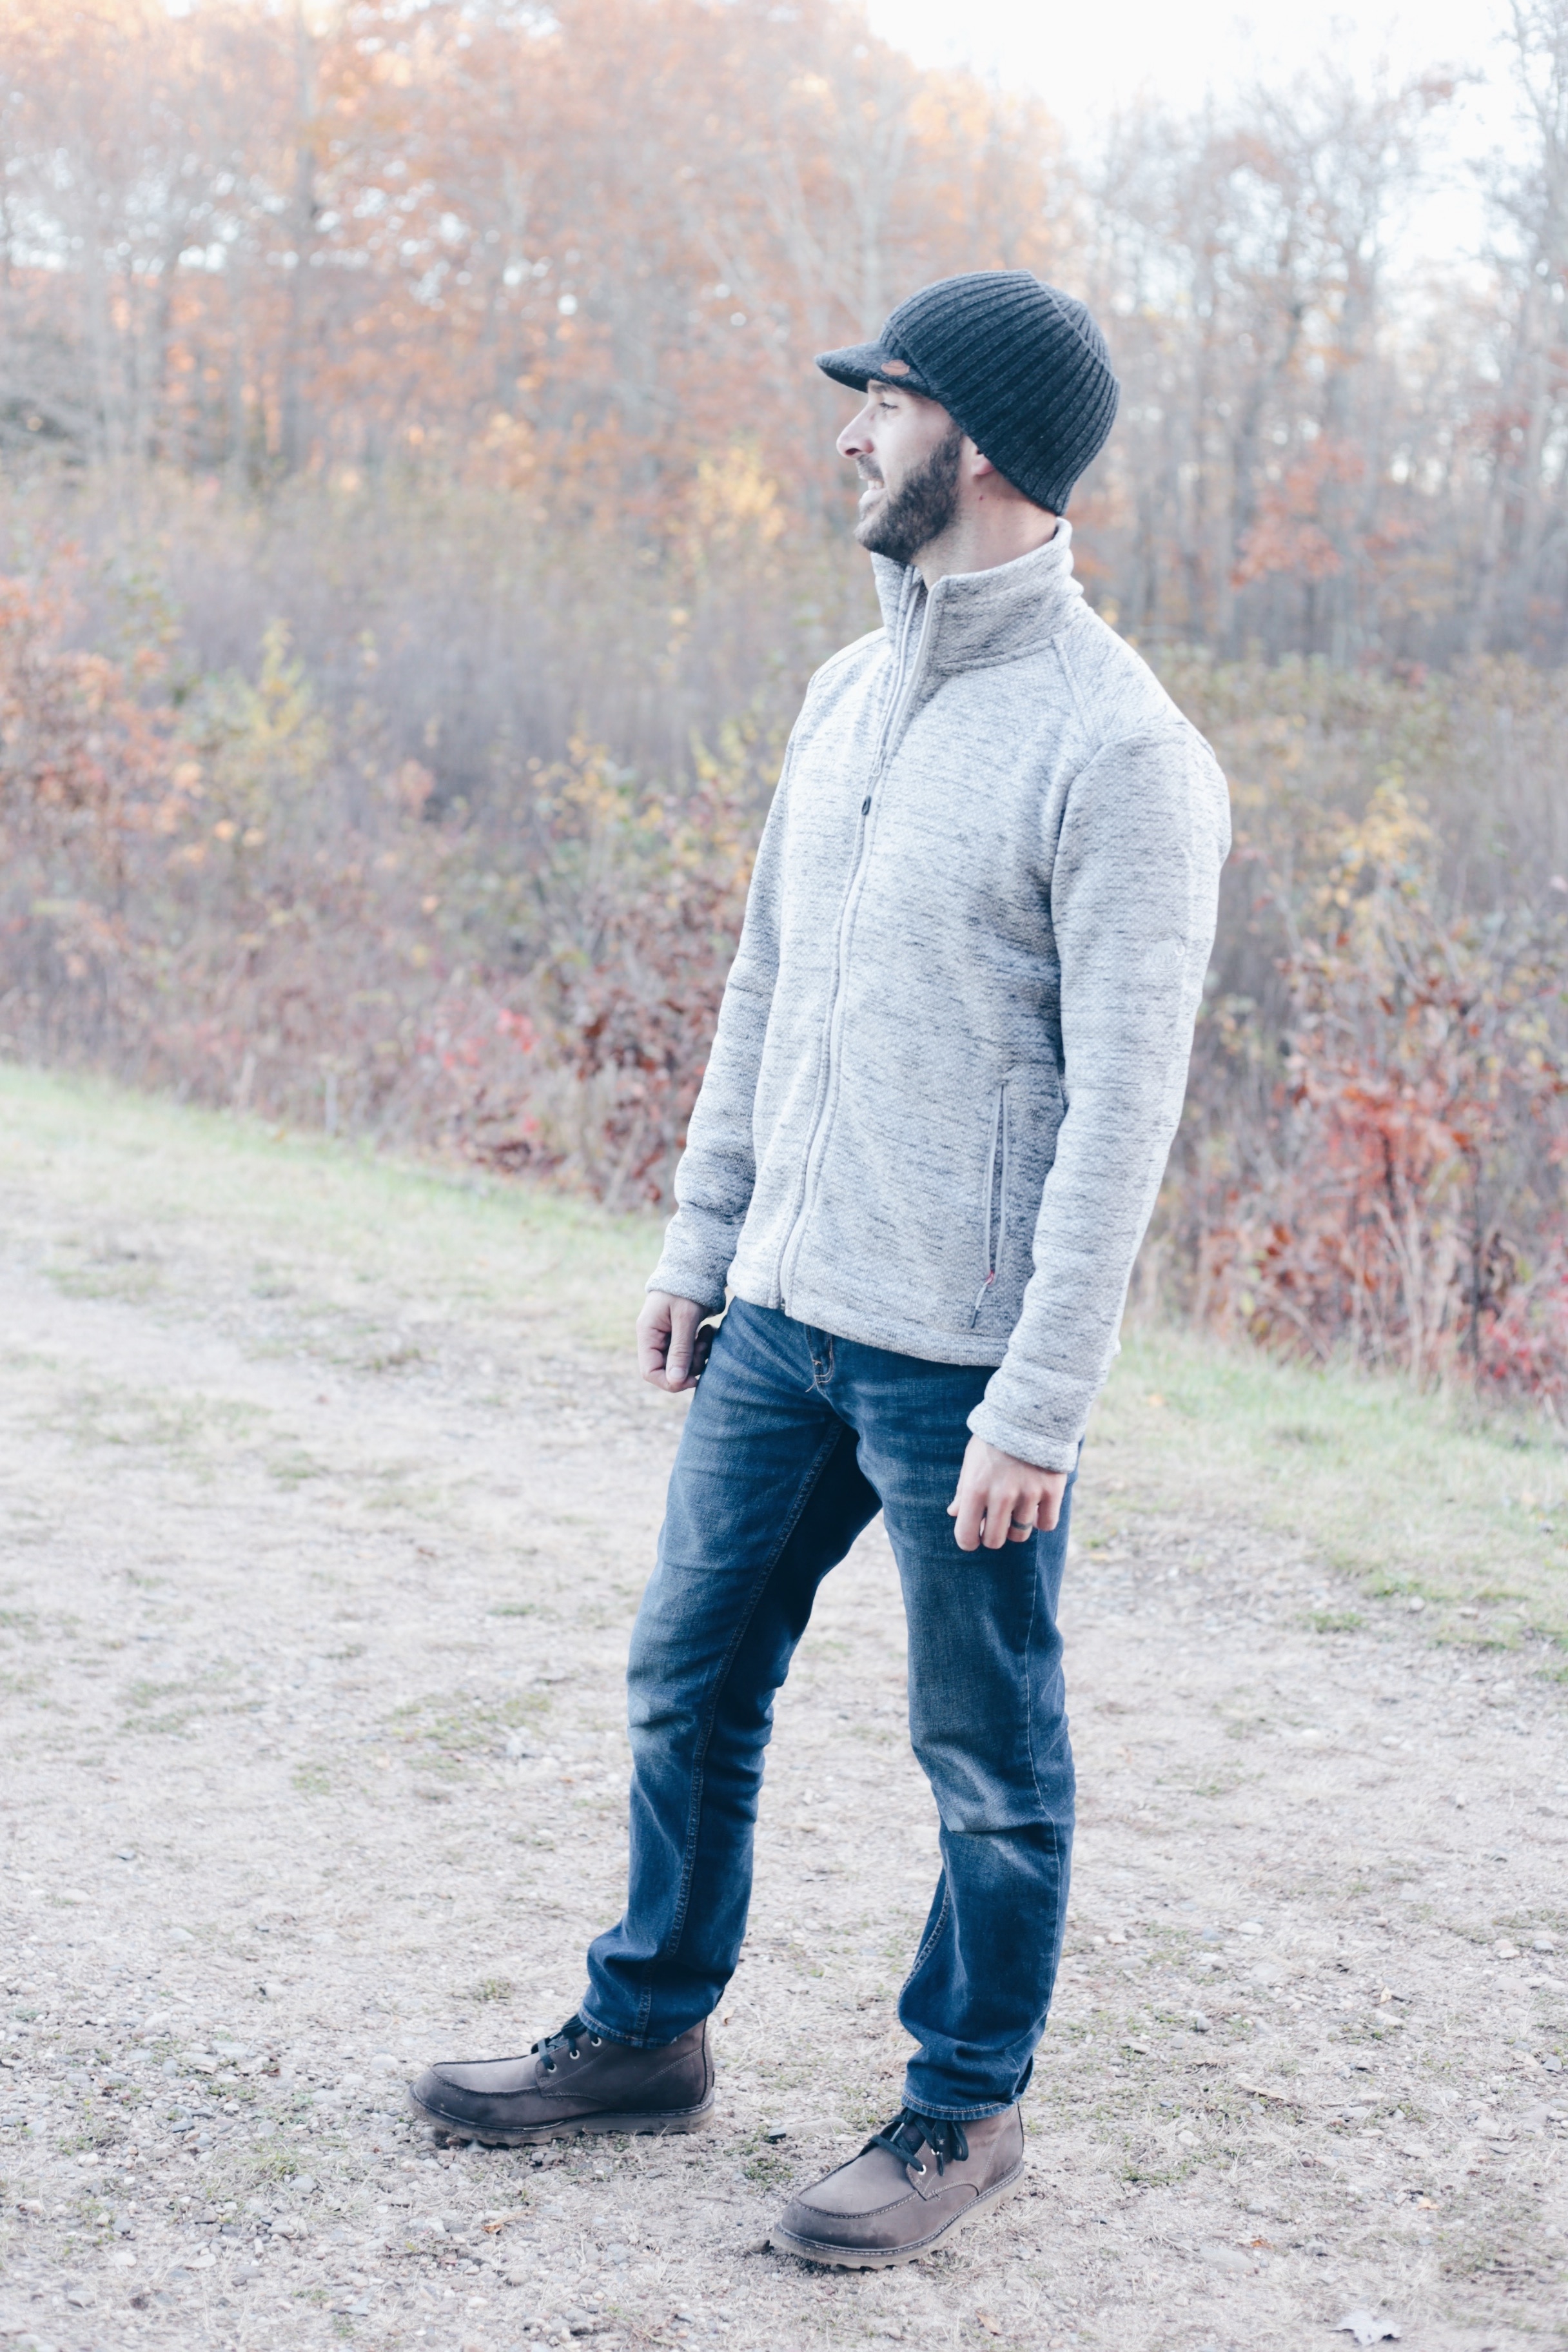  fall layers for family - men's fall jacket and hat on pinteresting plans fashion blog